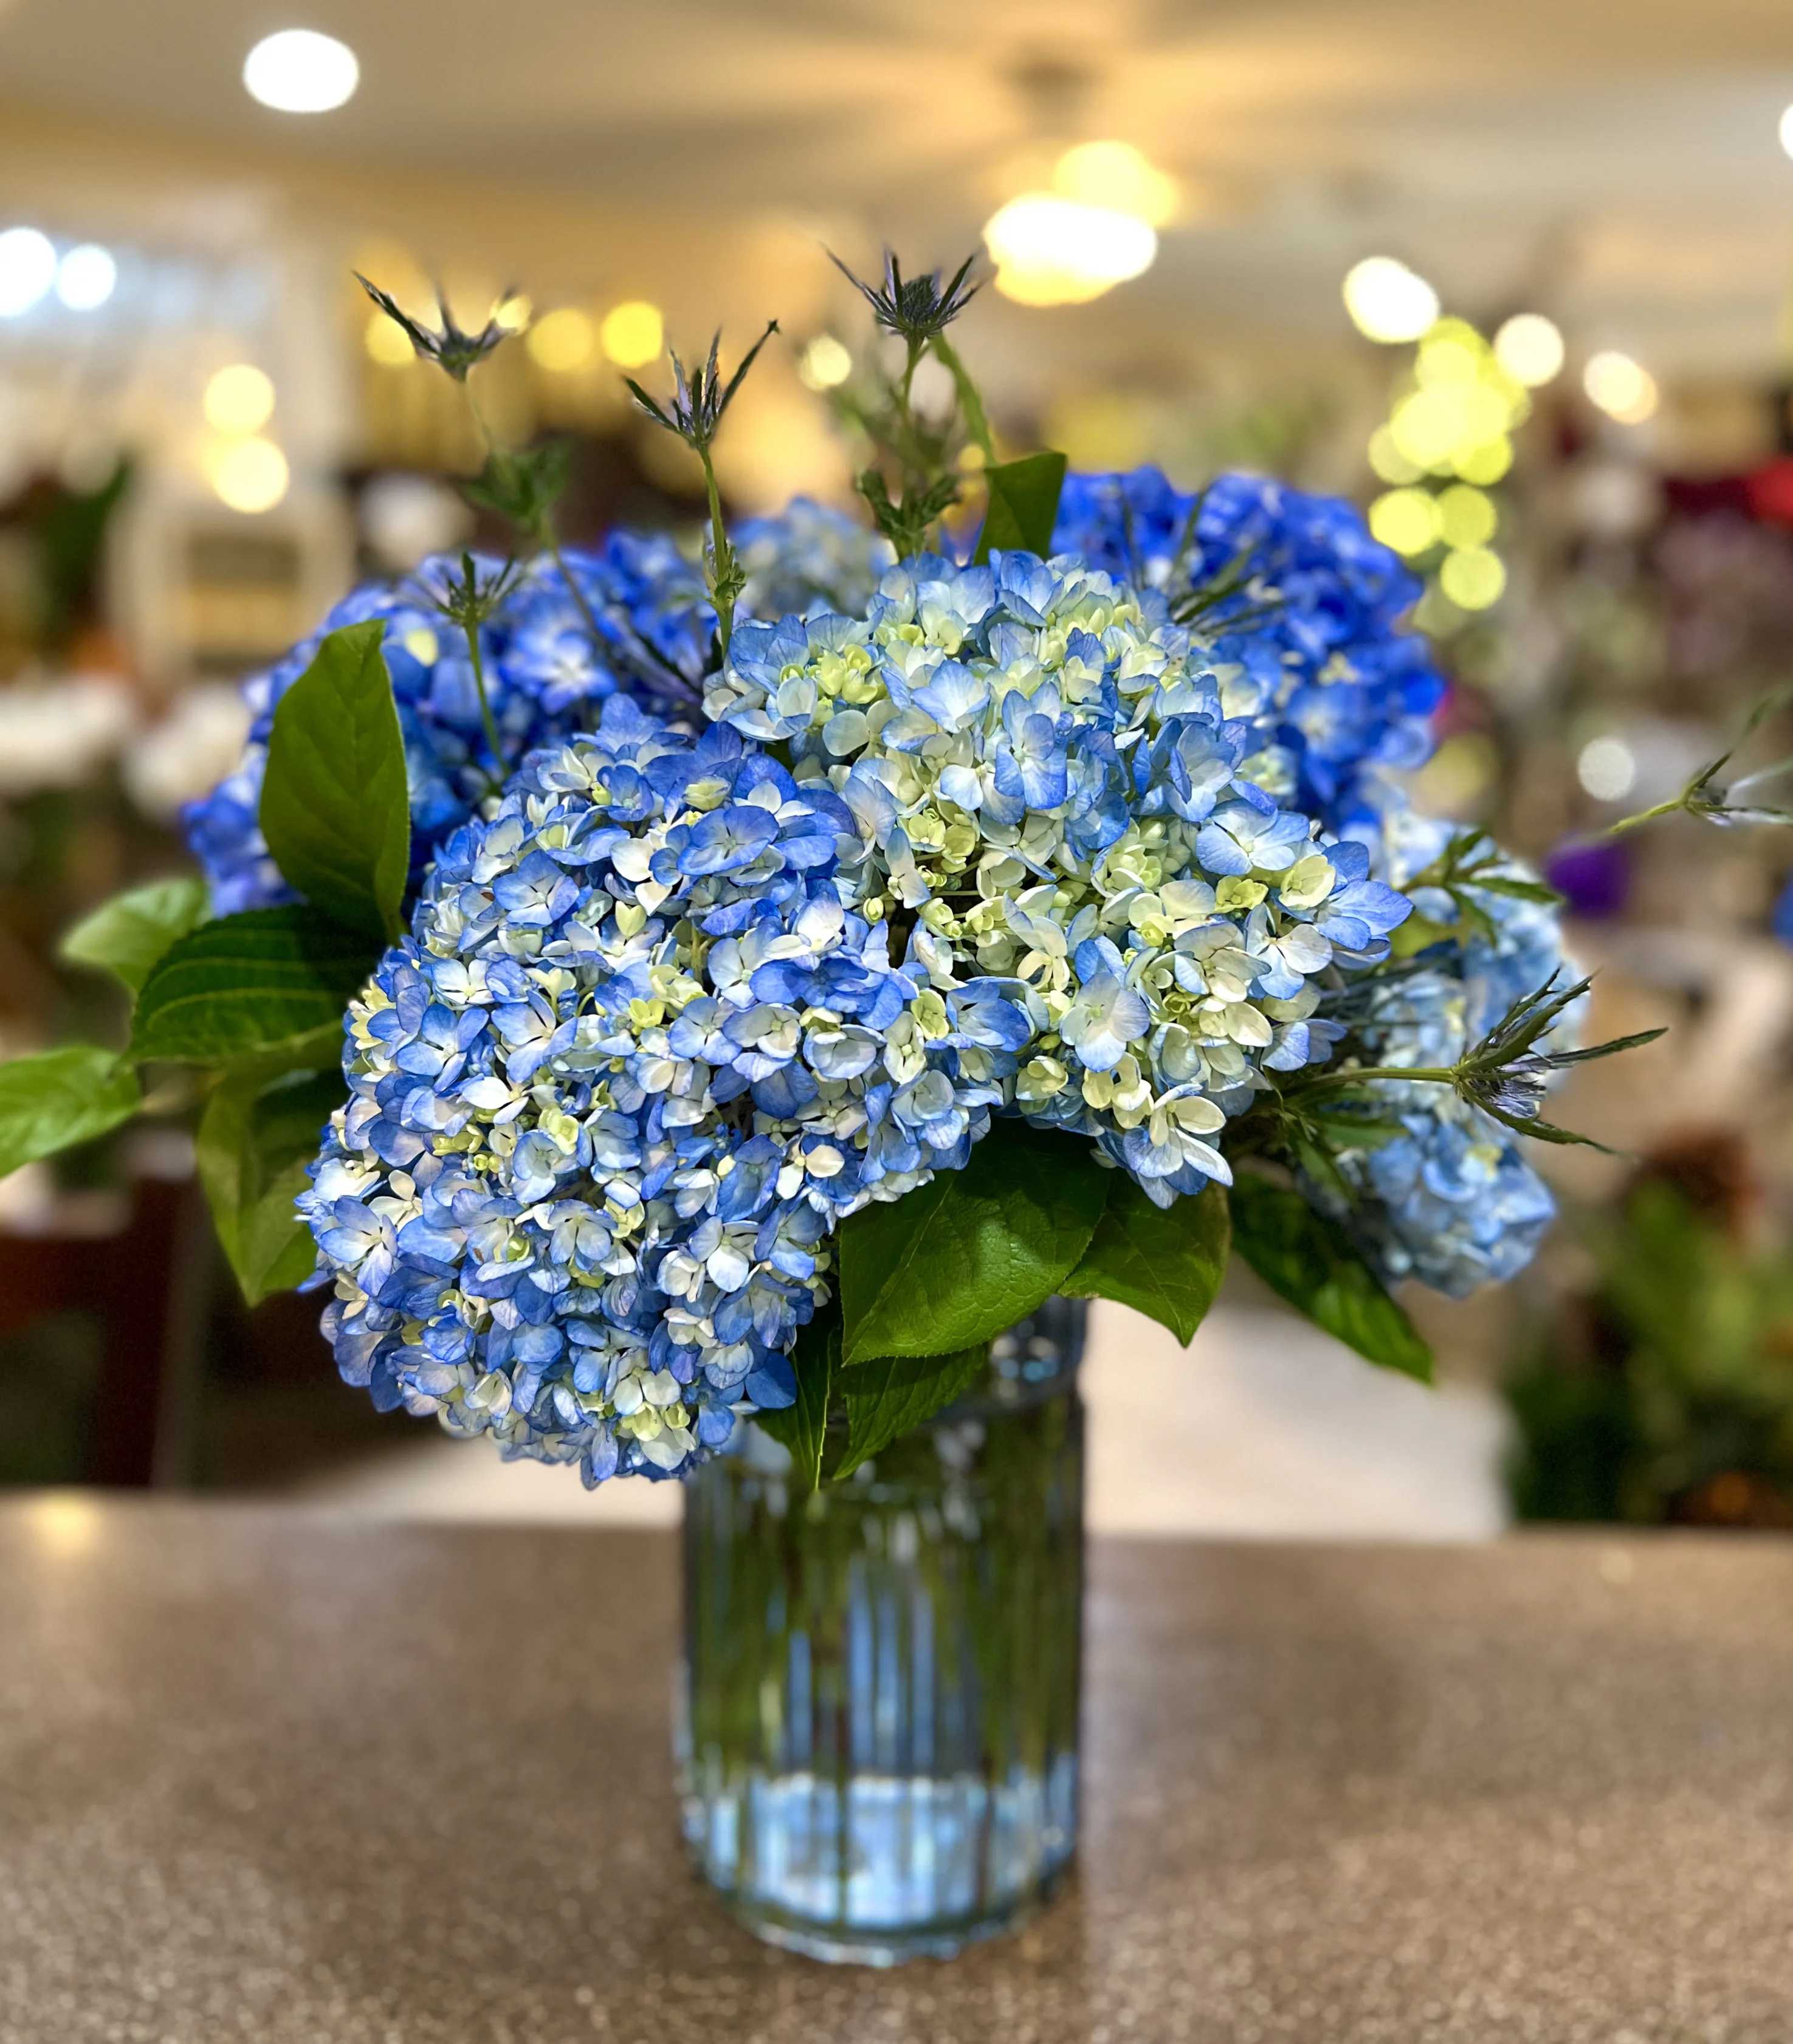 Blue Extravaganza by Heavenly Inspirations - This beautiful arrangement of stunning Blue Hydrangea is sure to put a smile on any face! Only available for local deliveries.